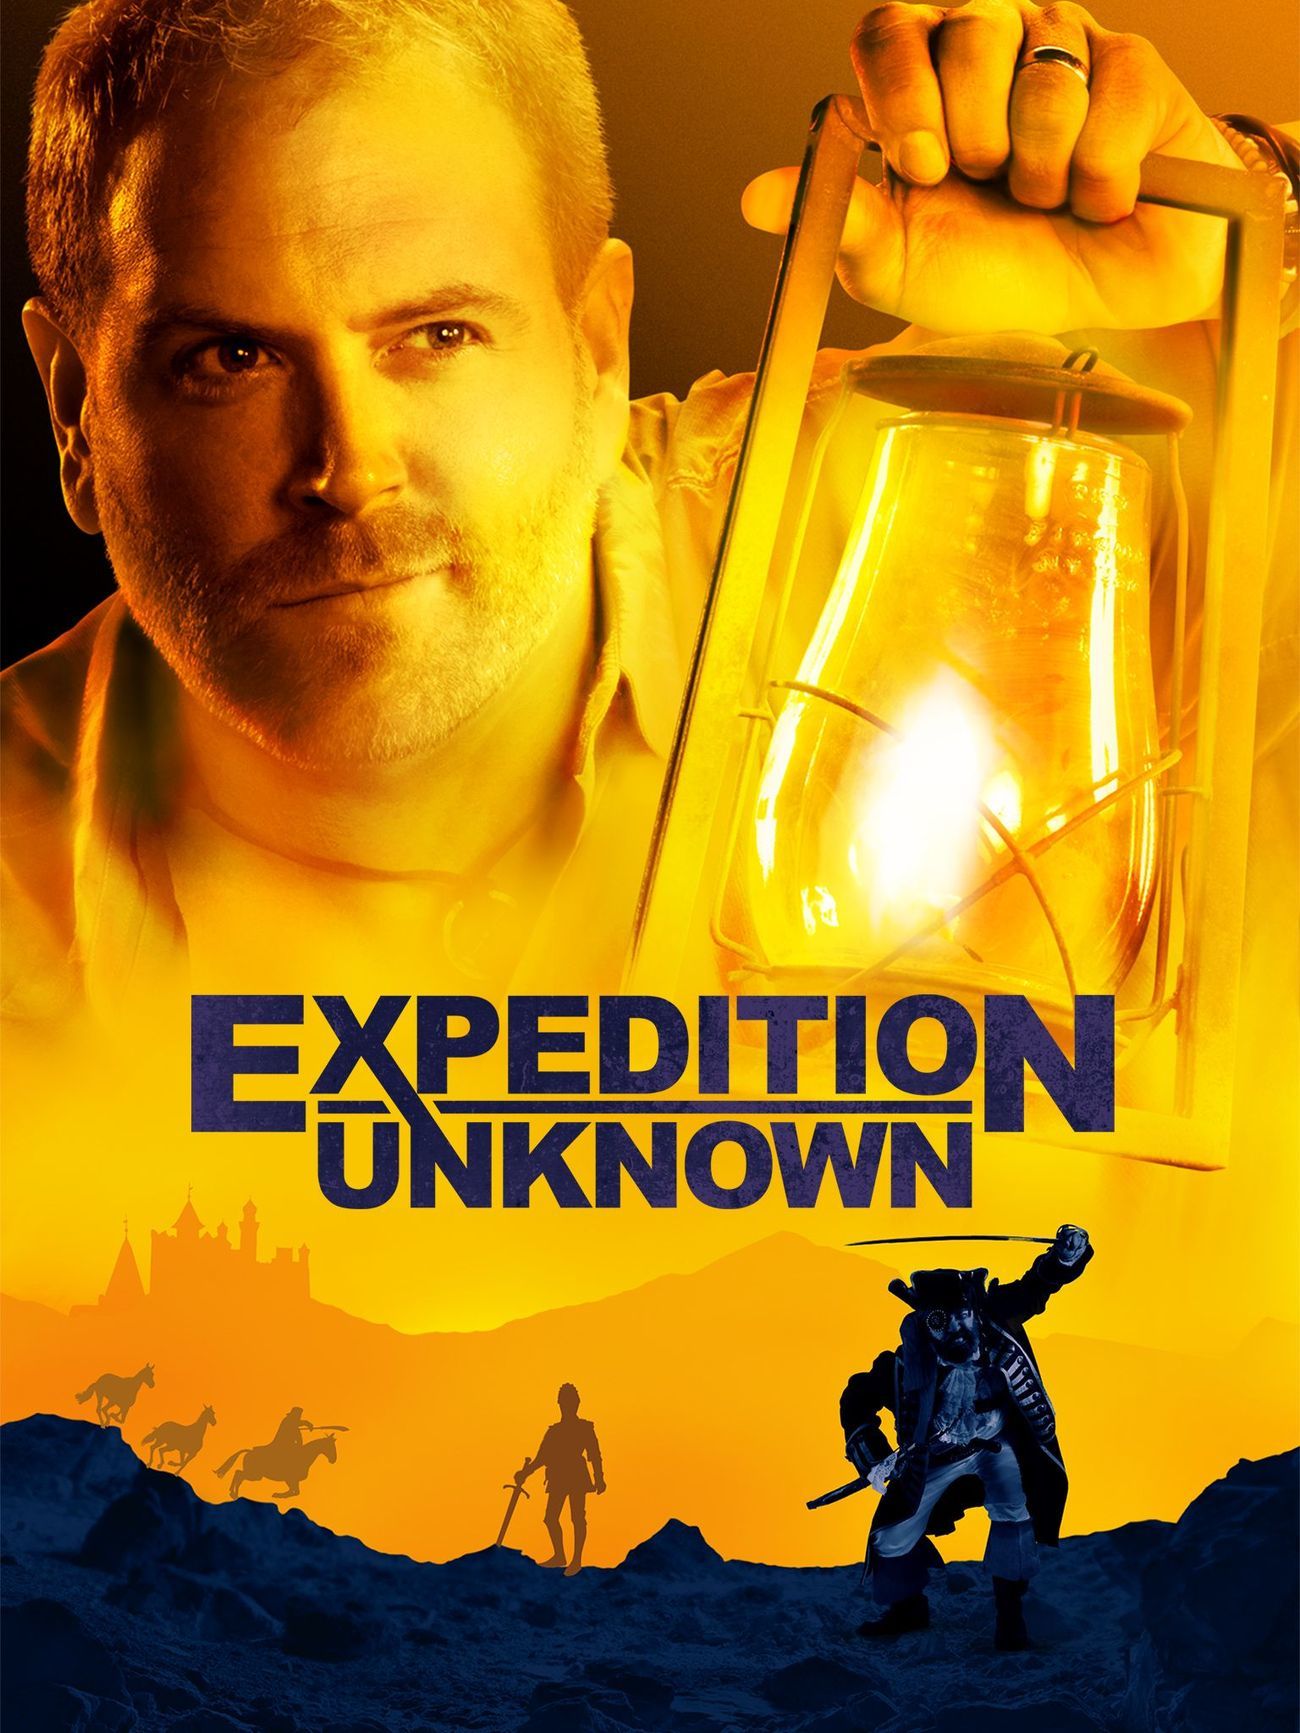 Watch Expedition Unknown online free